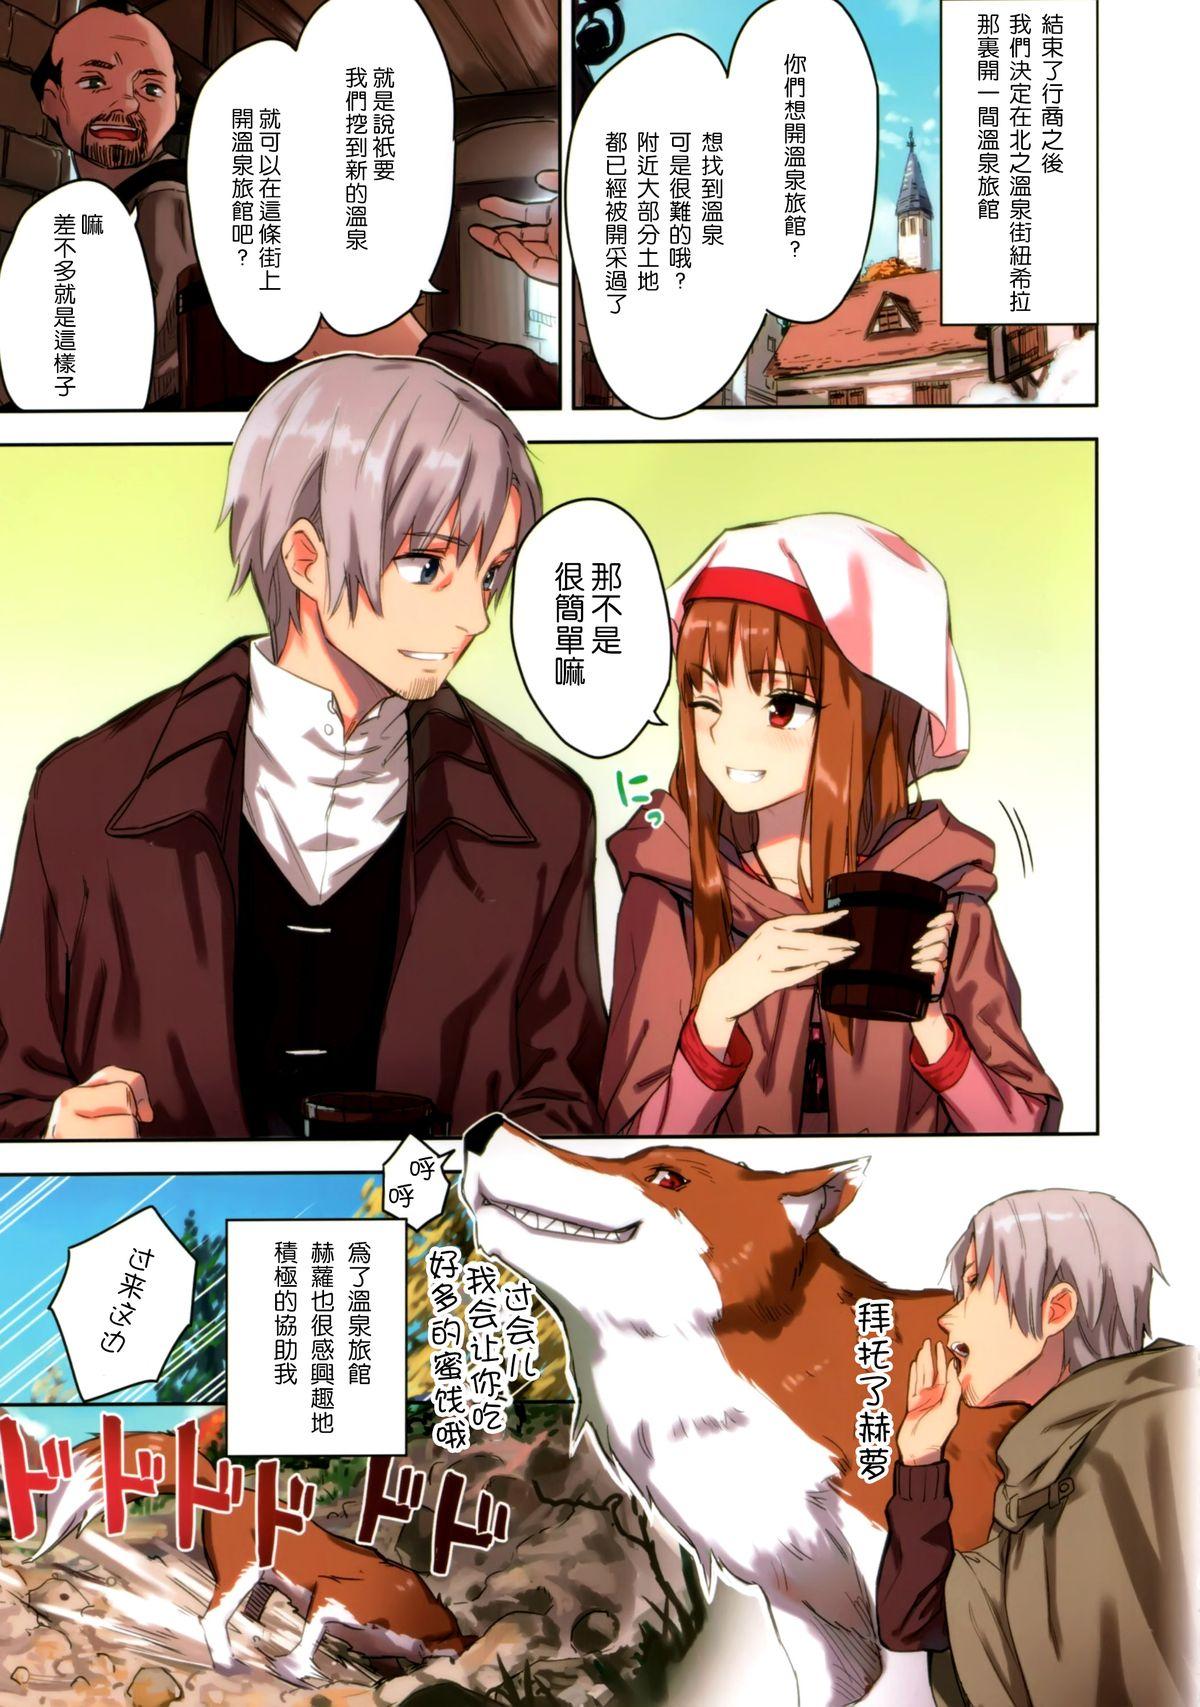 Ecuador Wacchi to Nyohhira Bon FULL COLOR - Spice and wolf Stripping - Page 6